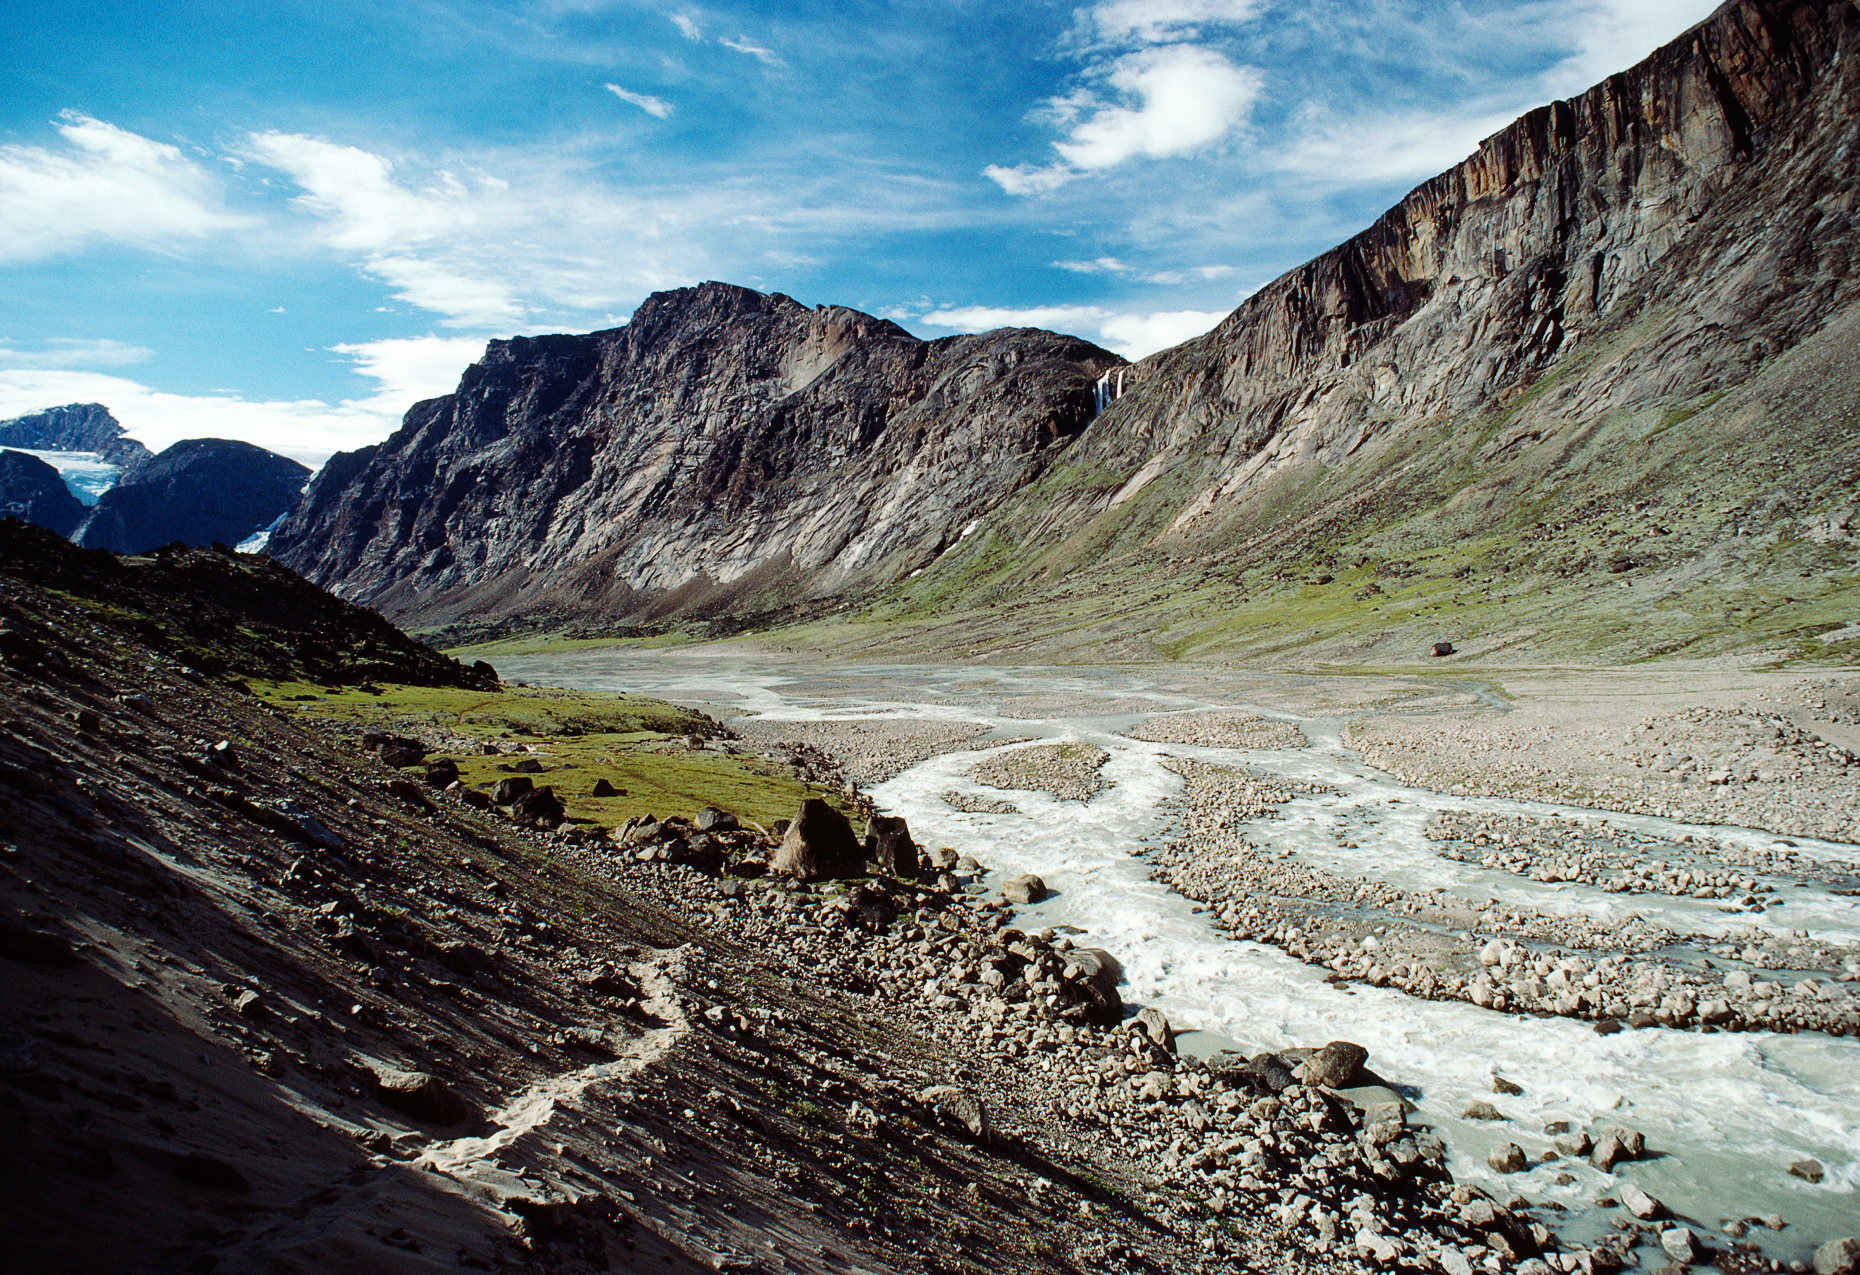 Windy Pass and the Weasel River, Auyuittuq National Park, Baffin